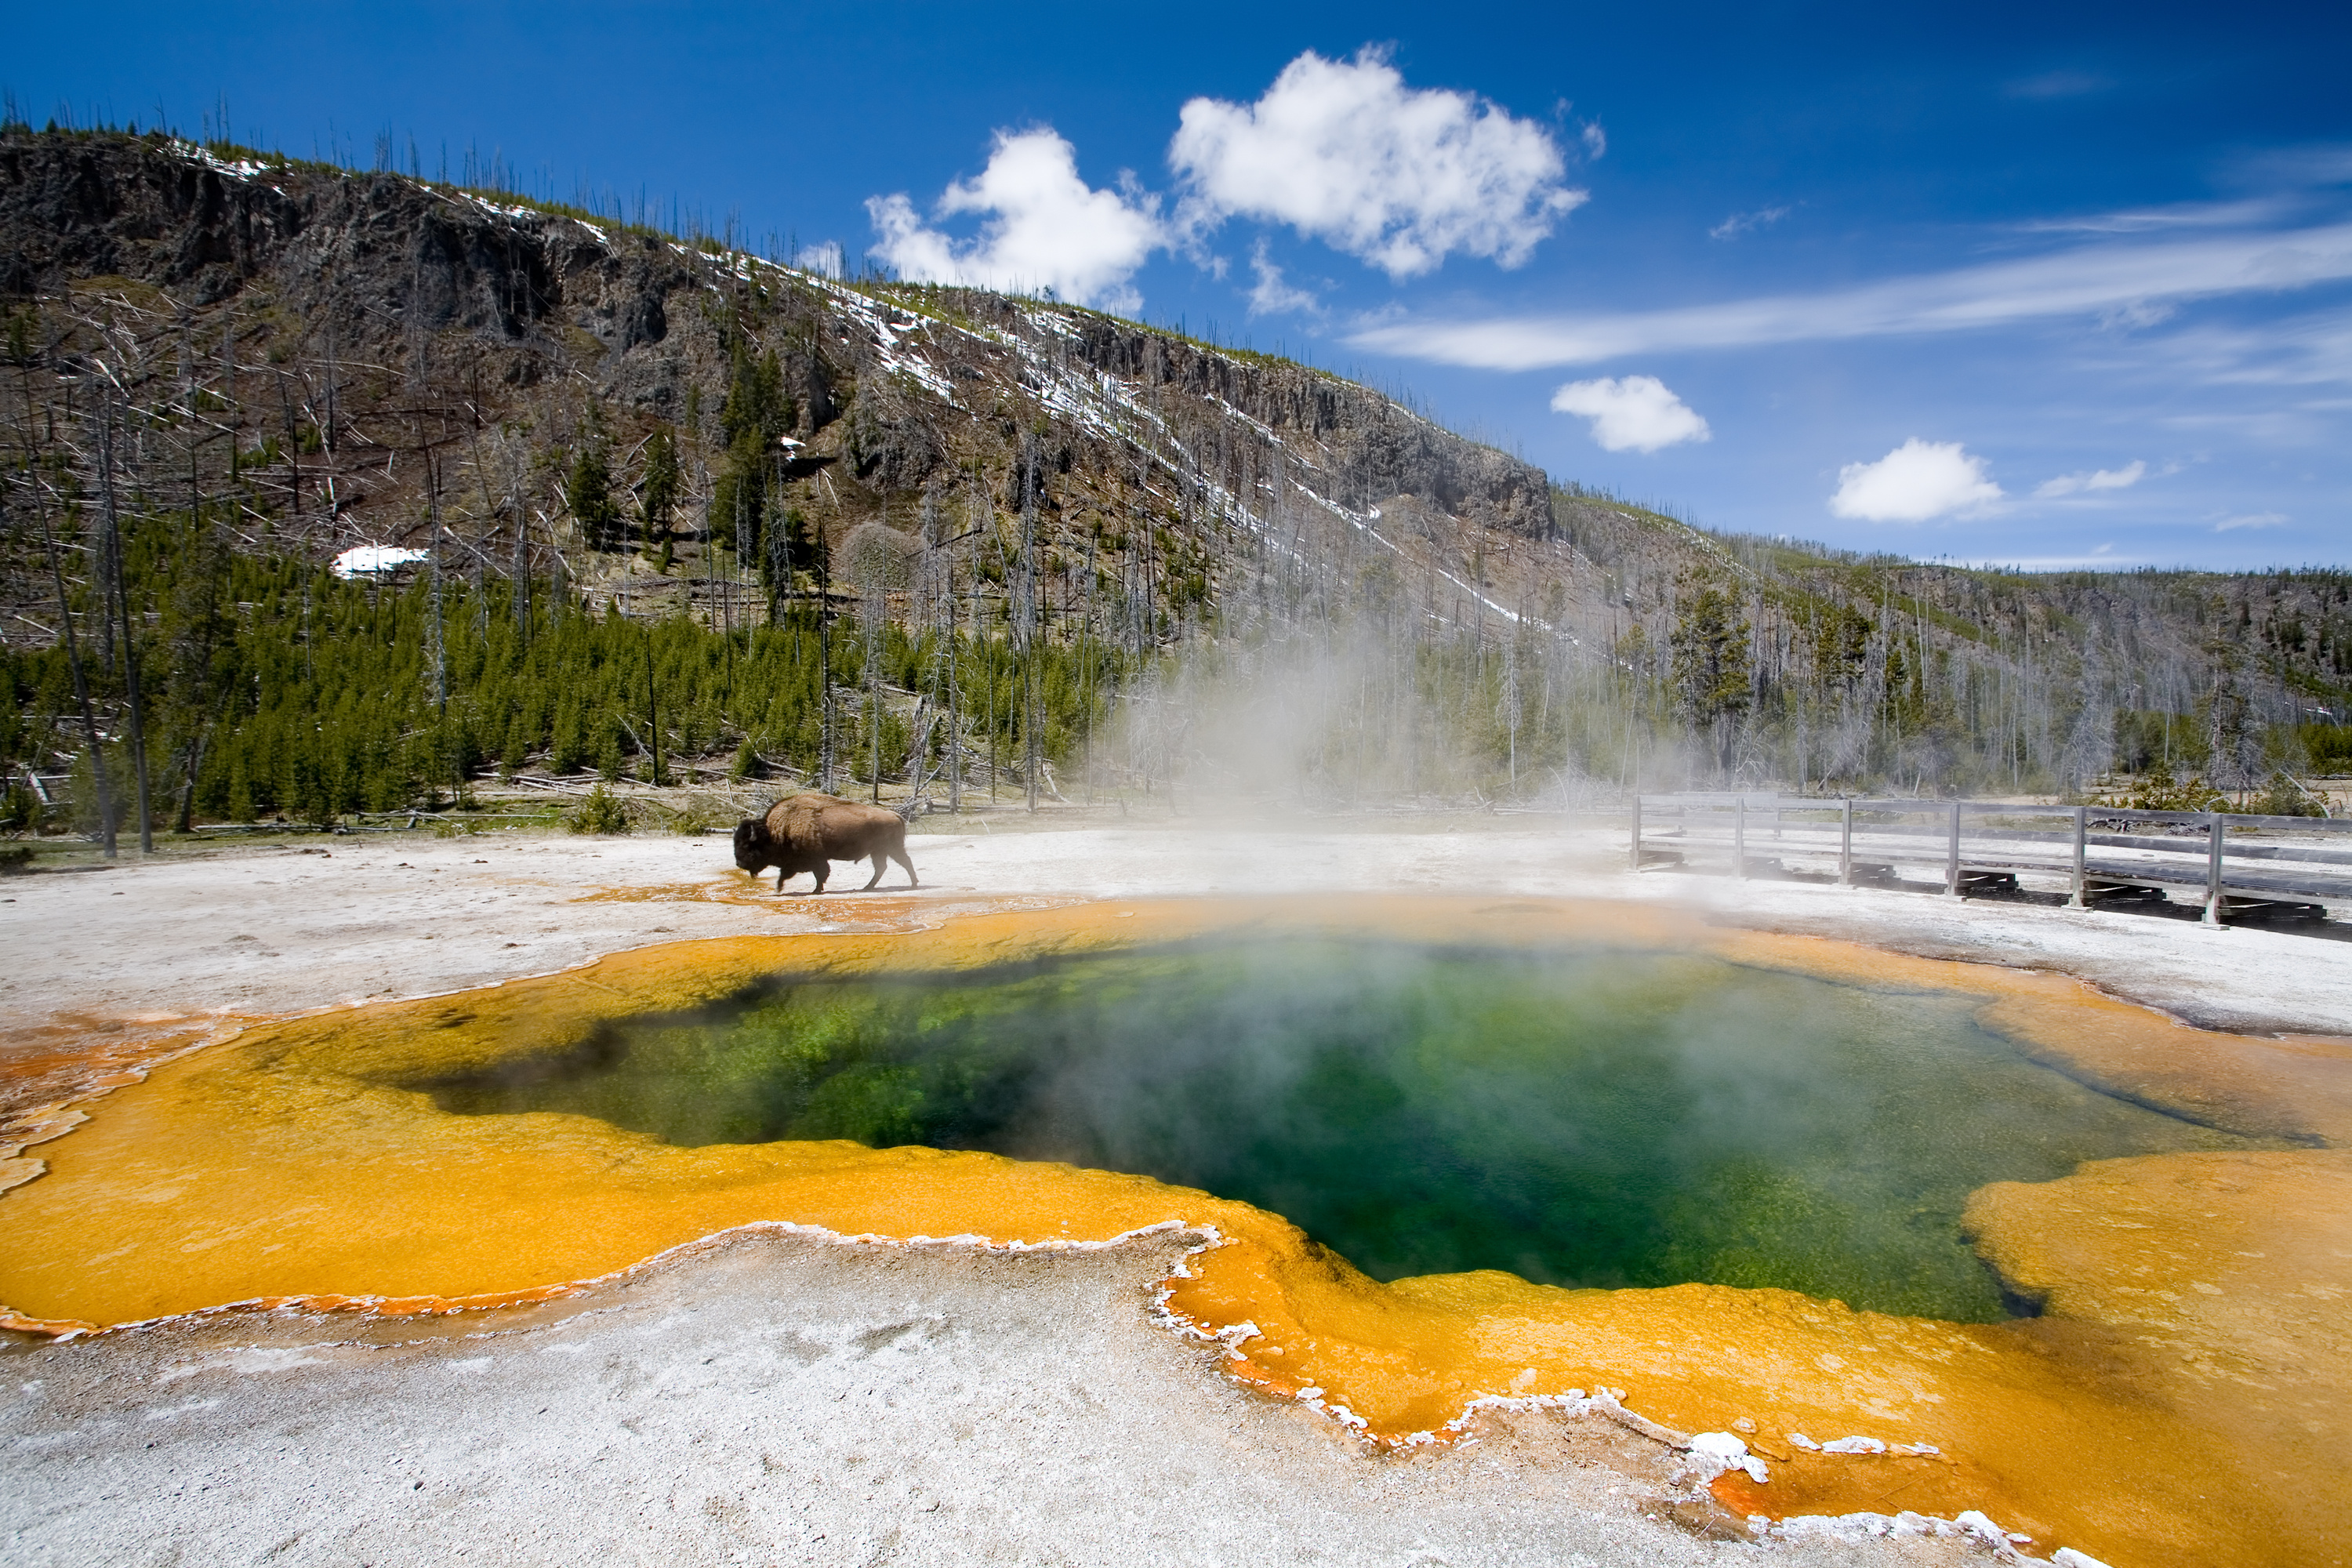 Should Go to Yellowstone Nationwide Park After In Lifetime ...